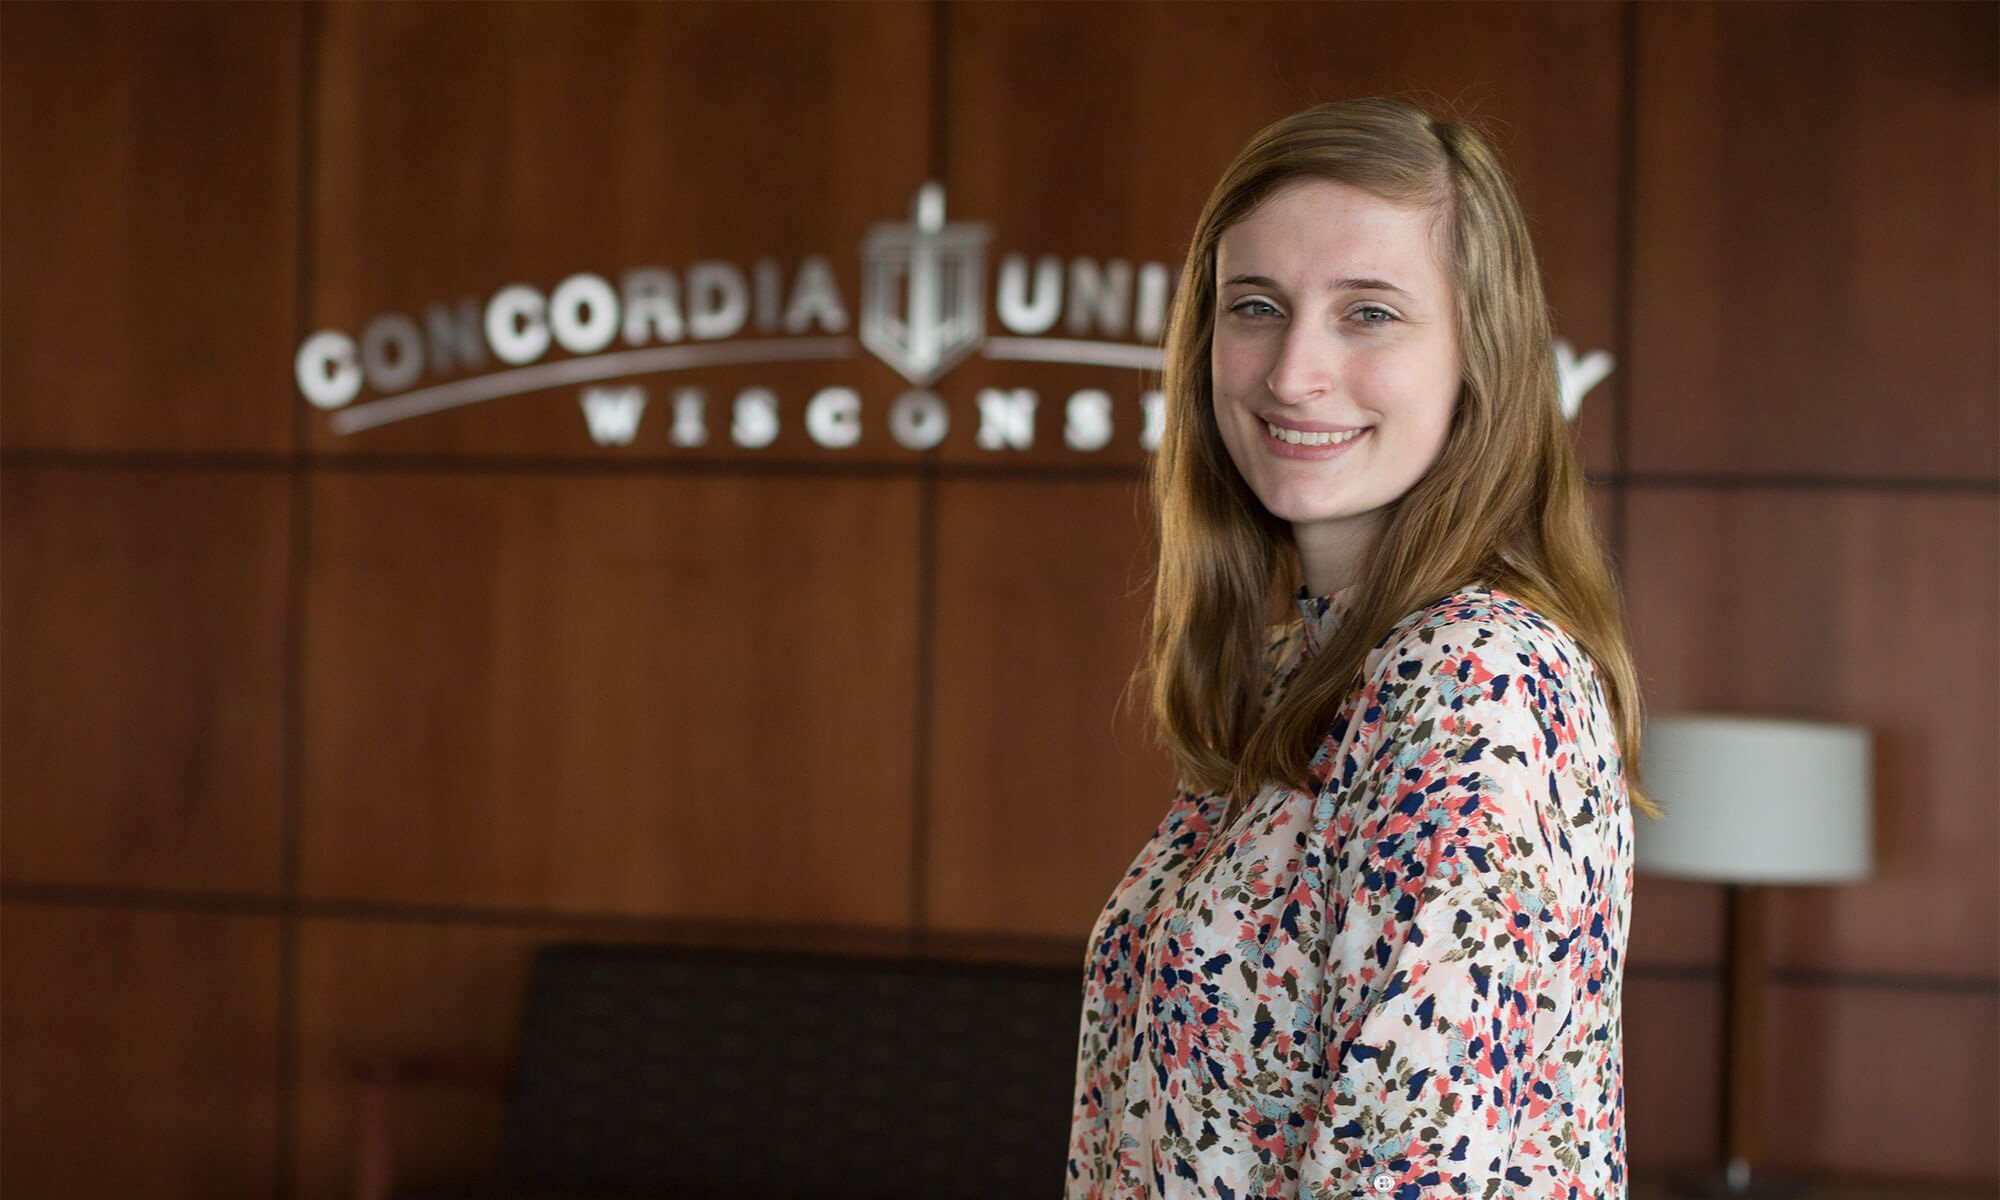 Claudia Zastrow will graduate with her degree in communication sciences and disorders from Concordia.